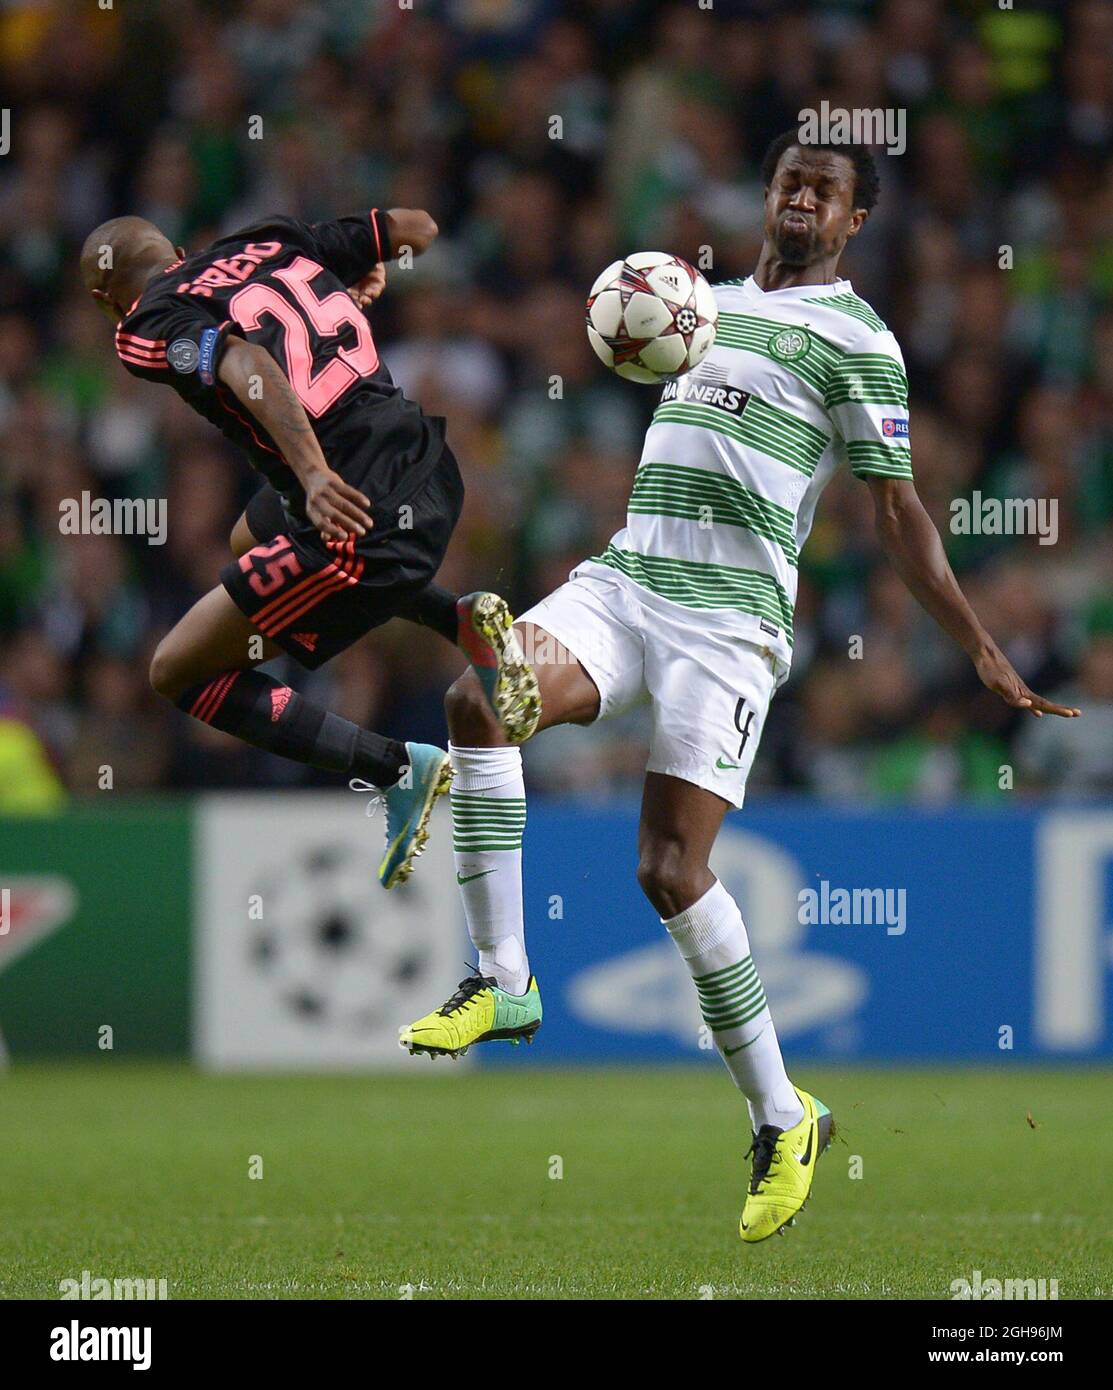 Thulani Serero of Ajax looses the ball to Efe Ambrose of Celtic during UEFA Champions League Group H match between Celtic and Ajax at Celtic Park Stadium on Oct. 22, 2013, Glasgow, Scotland, Stock Photo